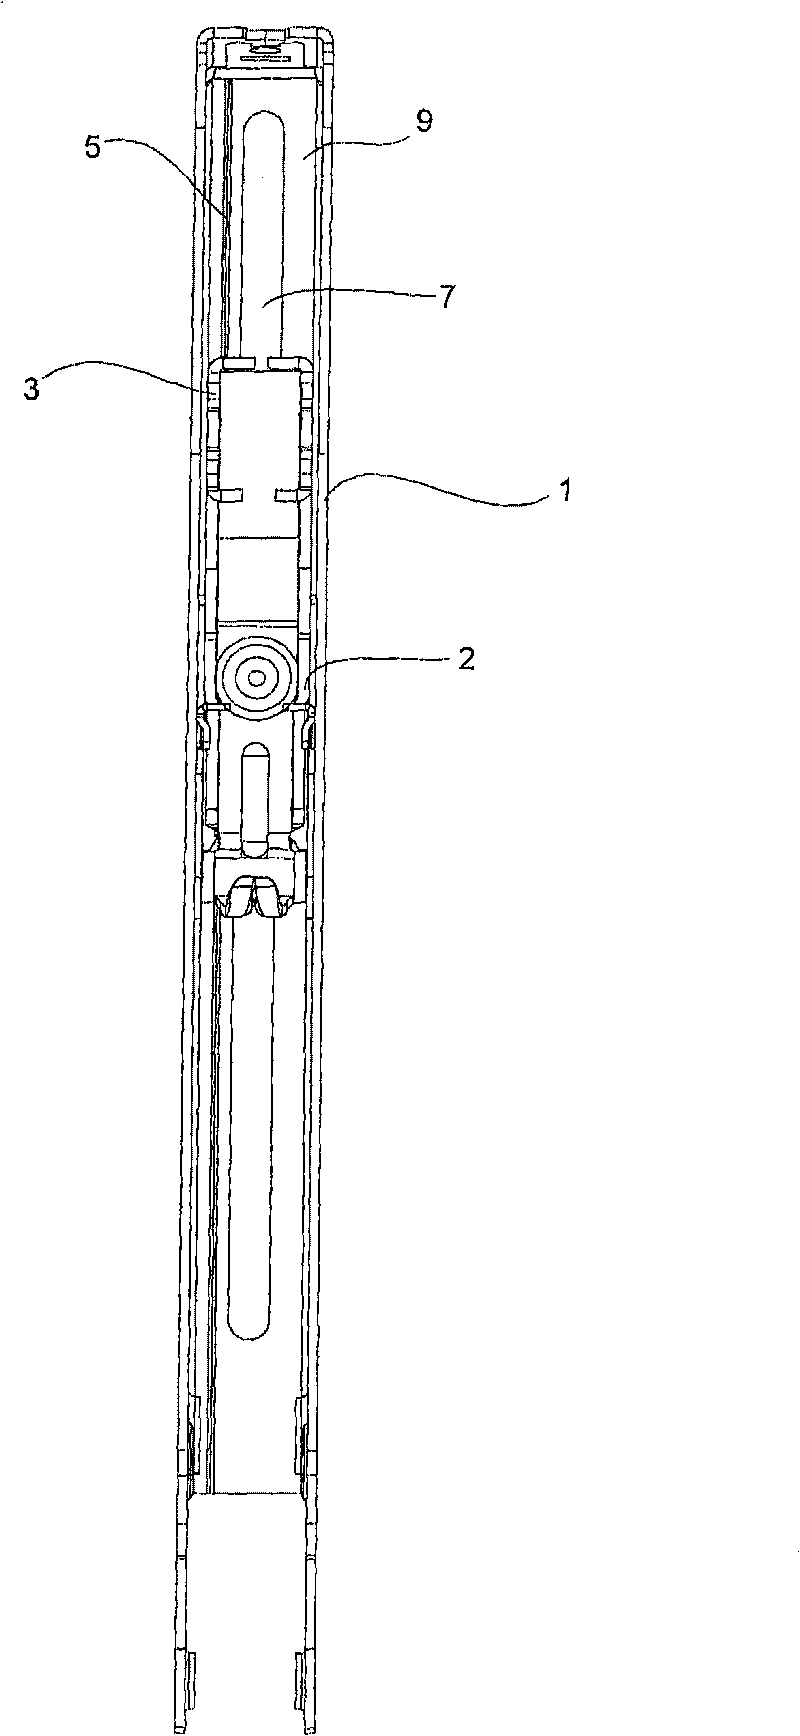 Upper roller supporting and pressurizing arm of drafting device